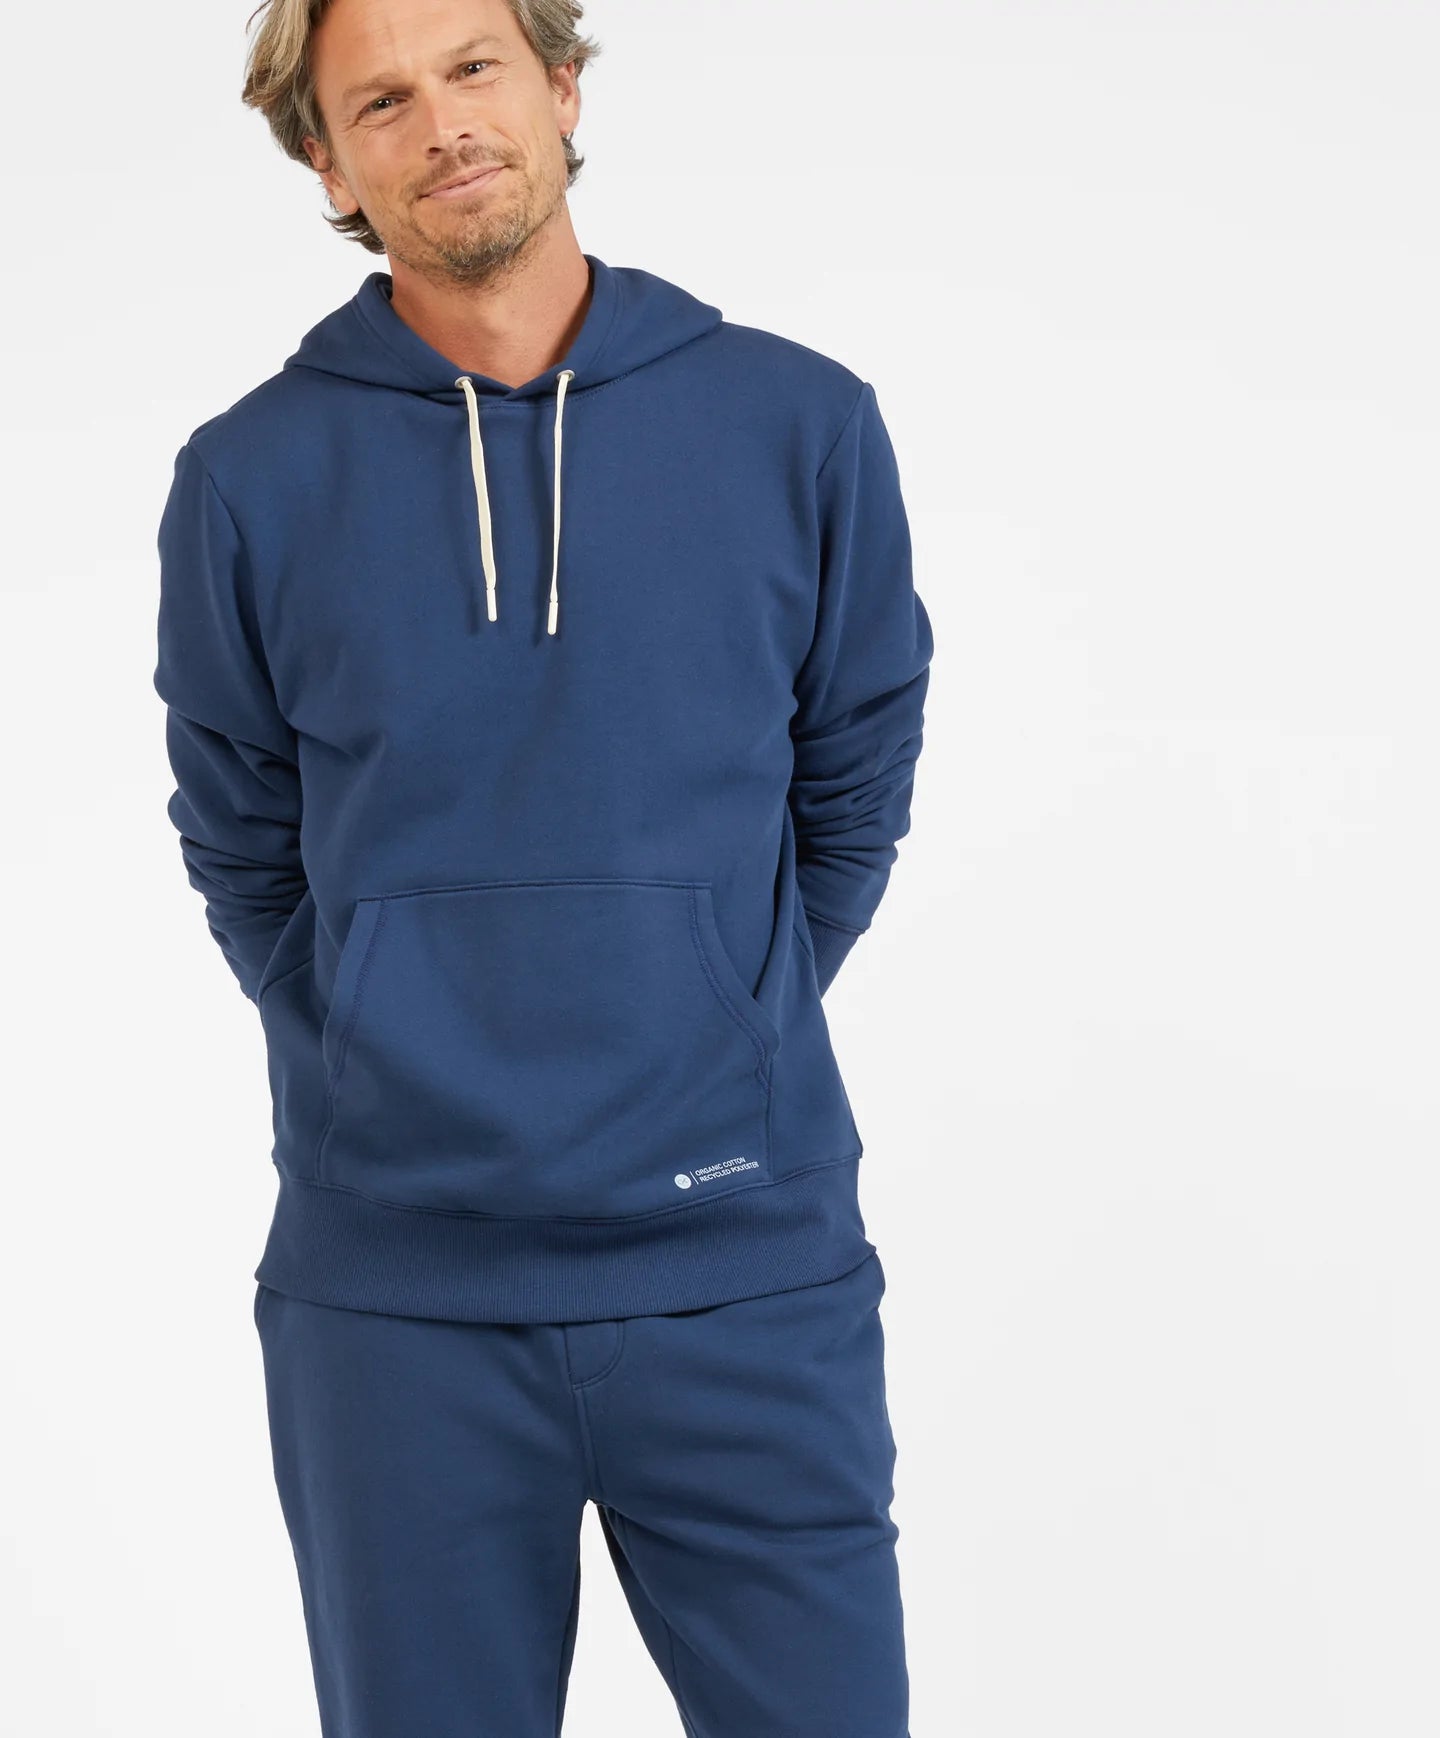 Outerknown All-Day Hoodie- Atlantic Blue